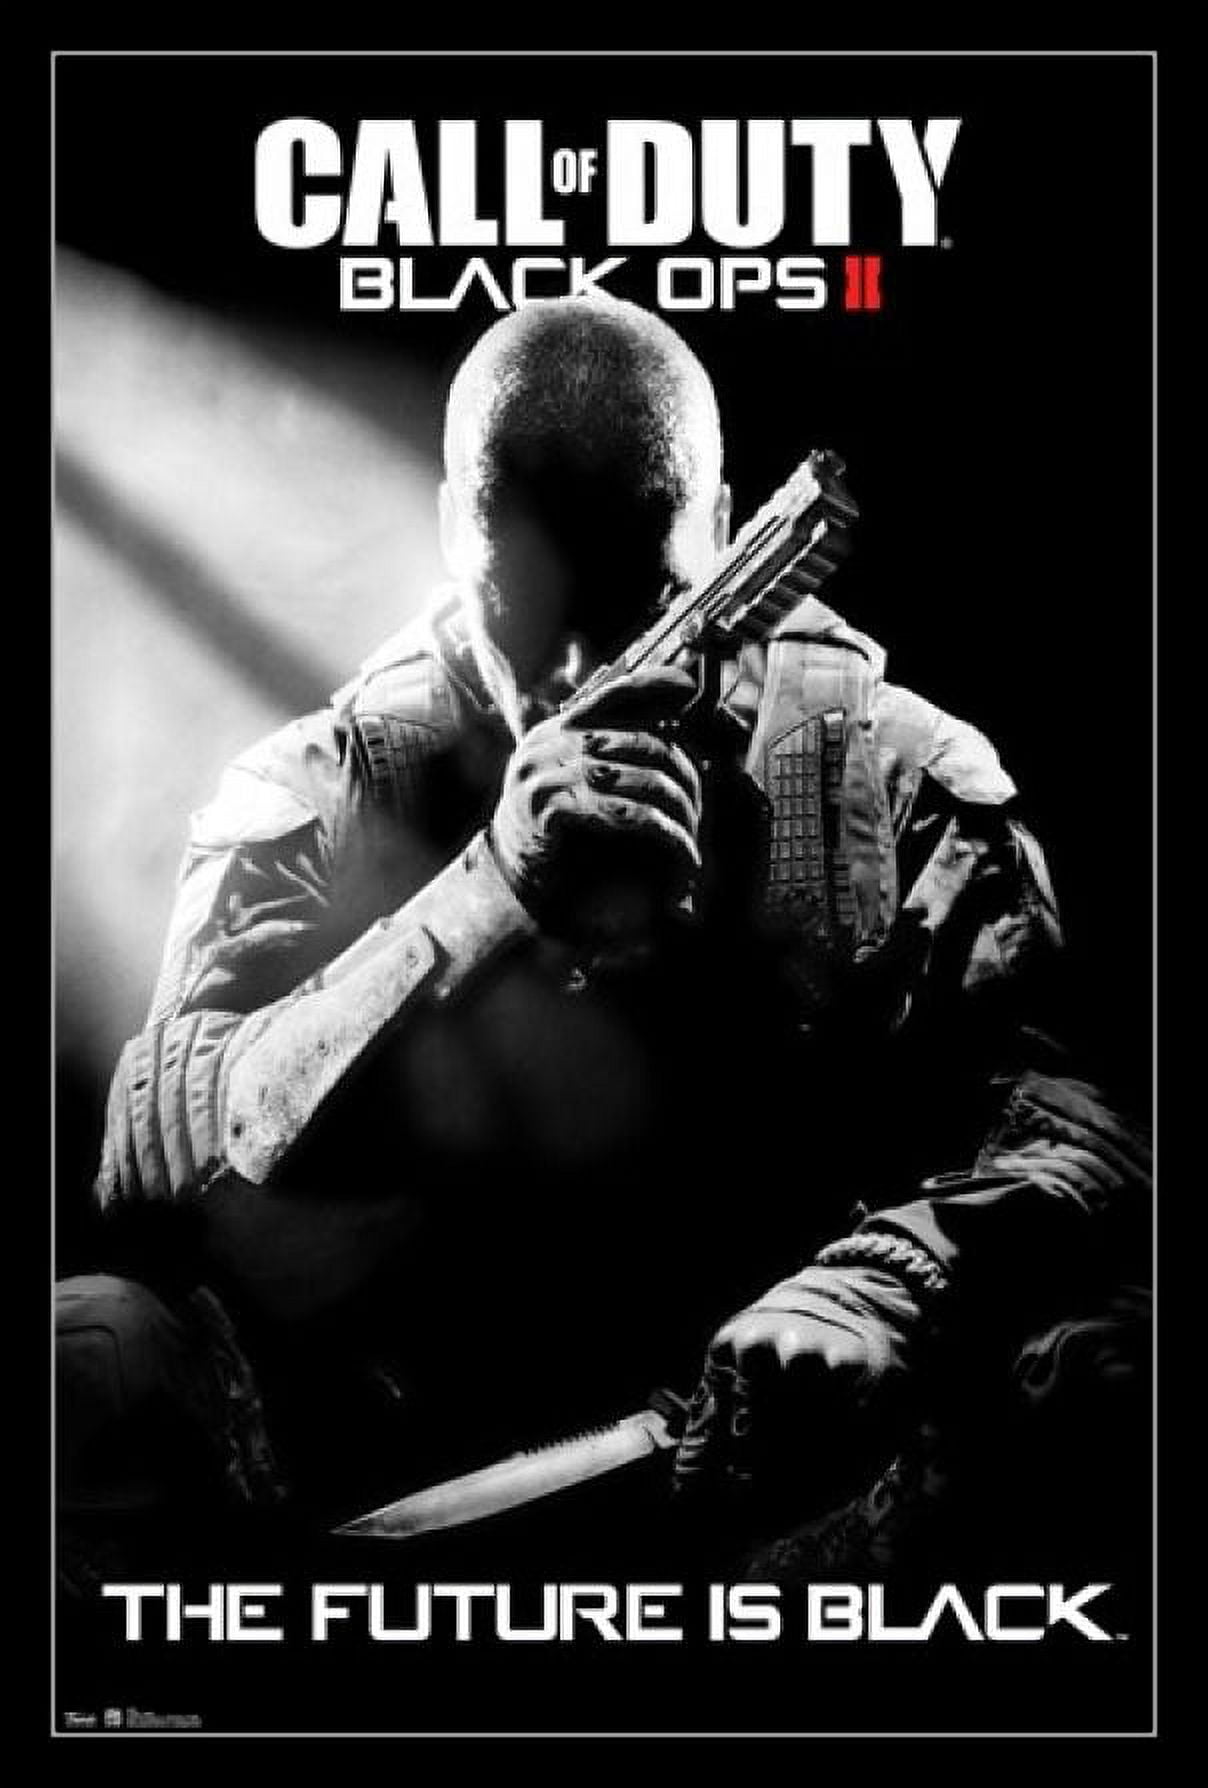 Call of Duty Black Ops II - Stealth Laminated & Framed Poster Print (24 x  36) - Walmart.com